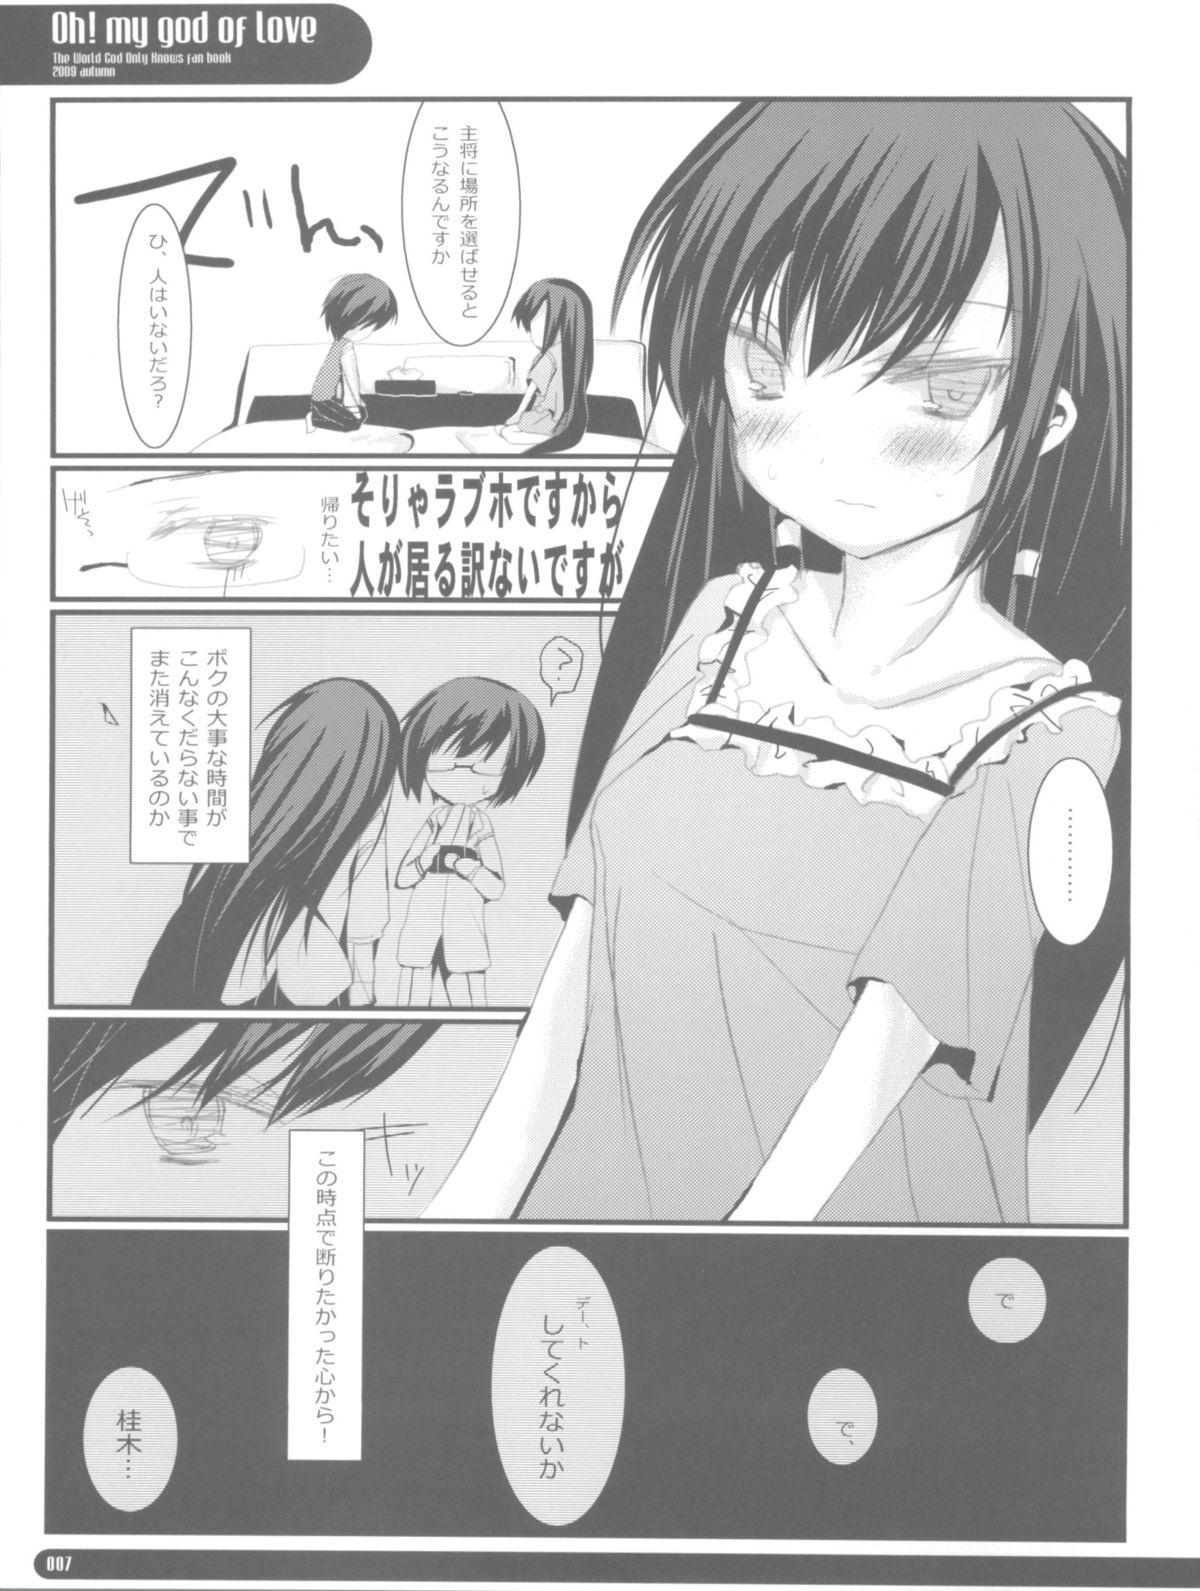 Close Up OH!MY GOD OF LOVE - The world god only knows Camgirls - Page 7